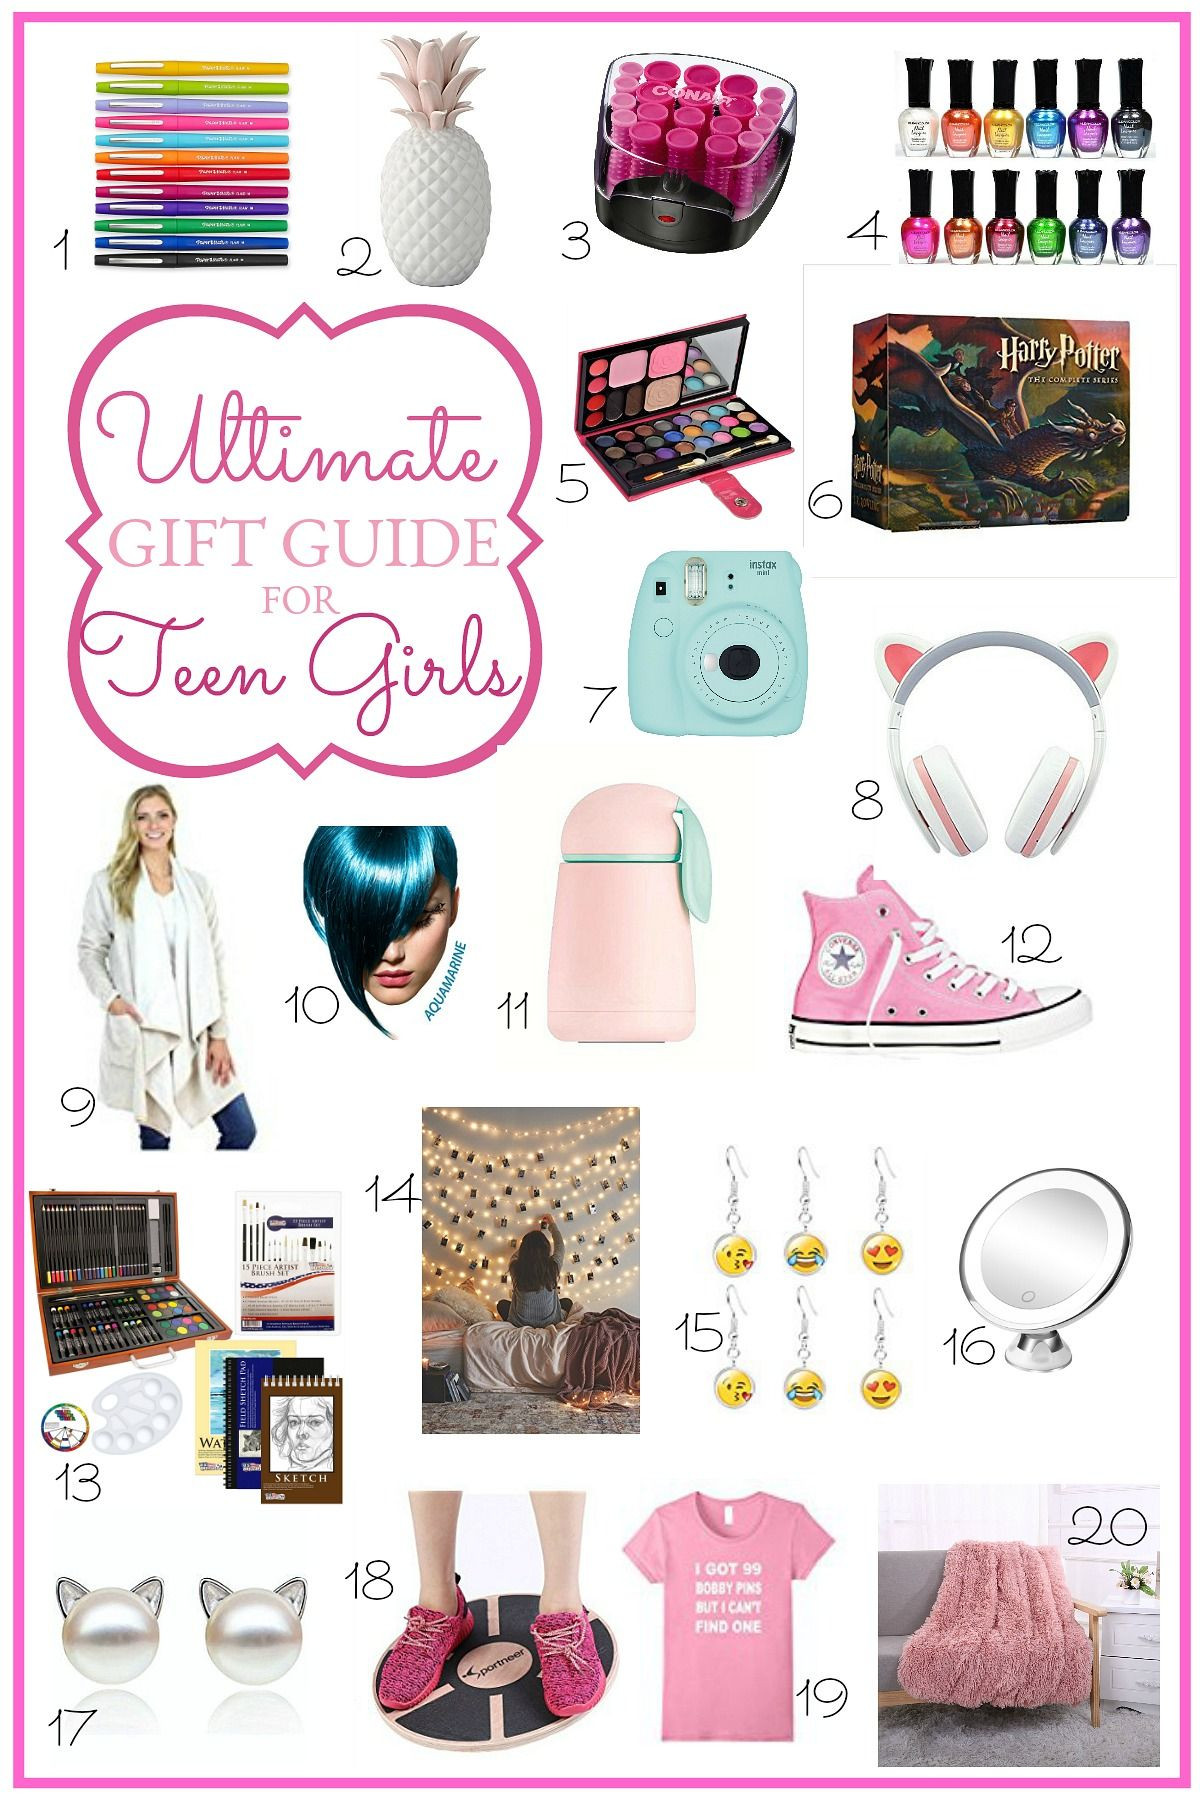 Birthday Gift Ideas For Teens
 Ultimate Holiday Gift Guide for Teen Girls